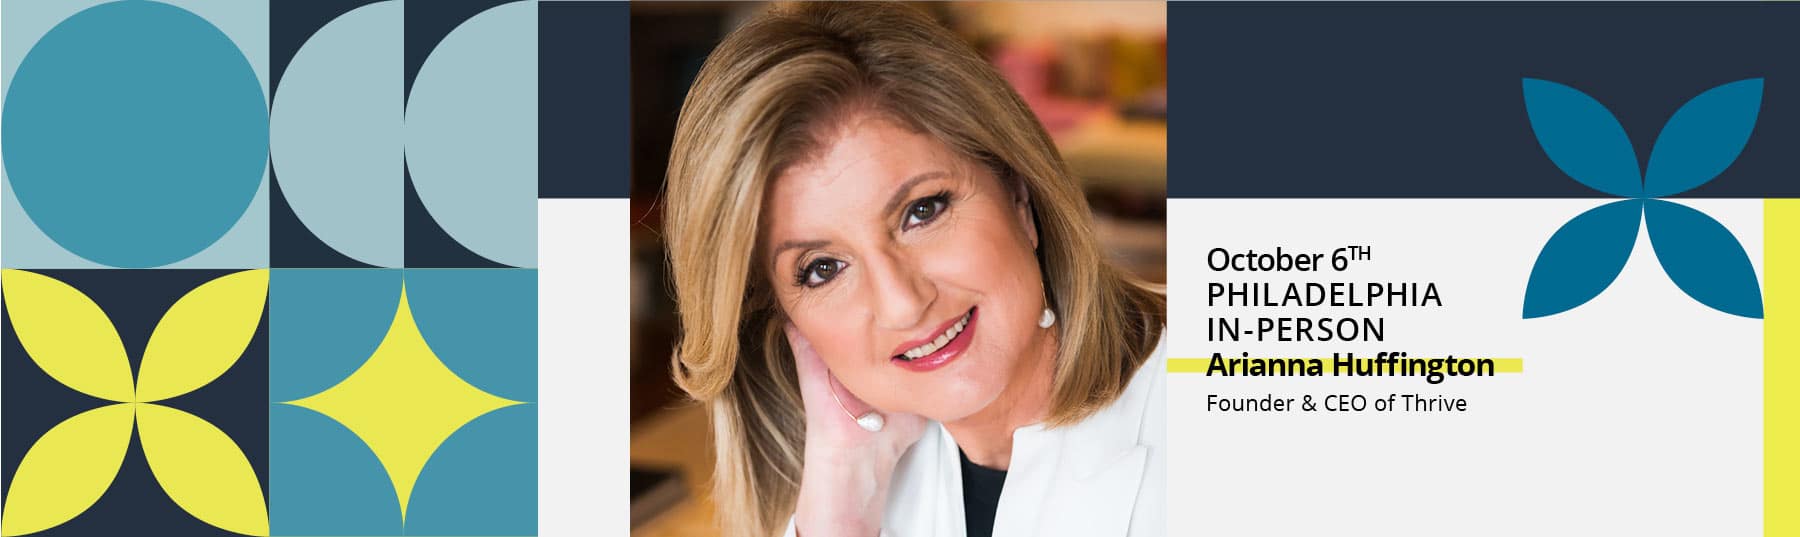 Join Arianna Huffington in-person on October 6th at the Pennsylvania Conference for Women